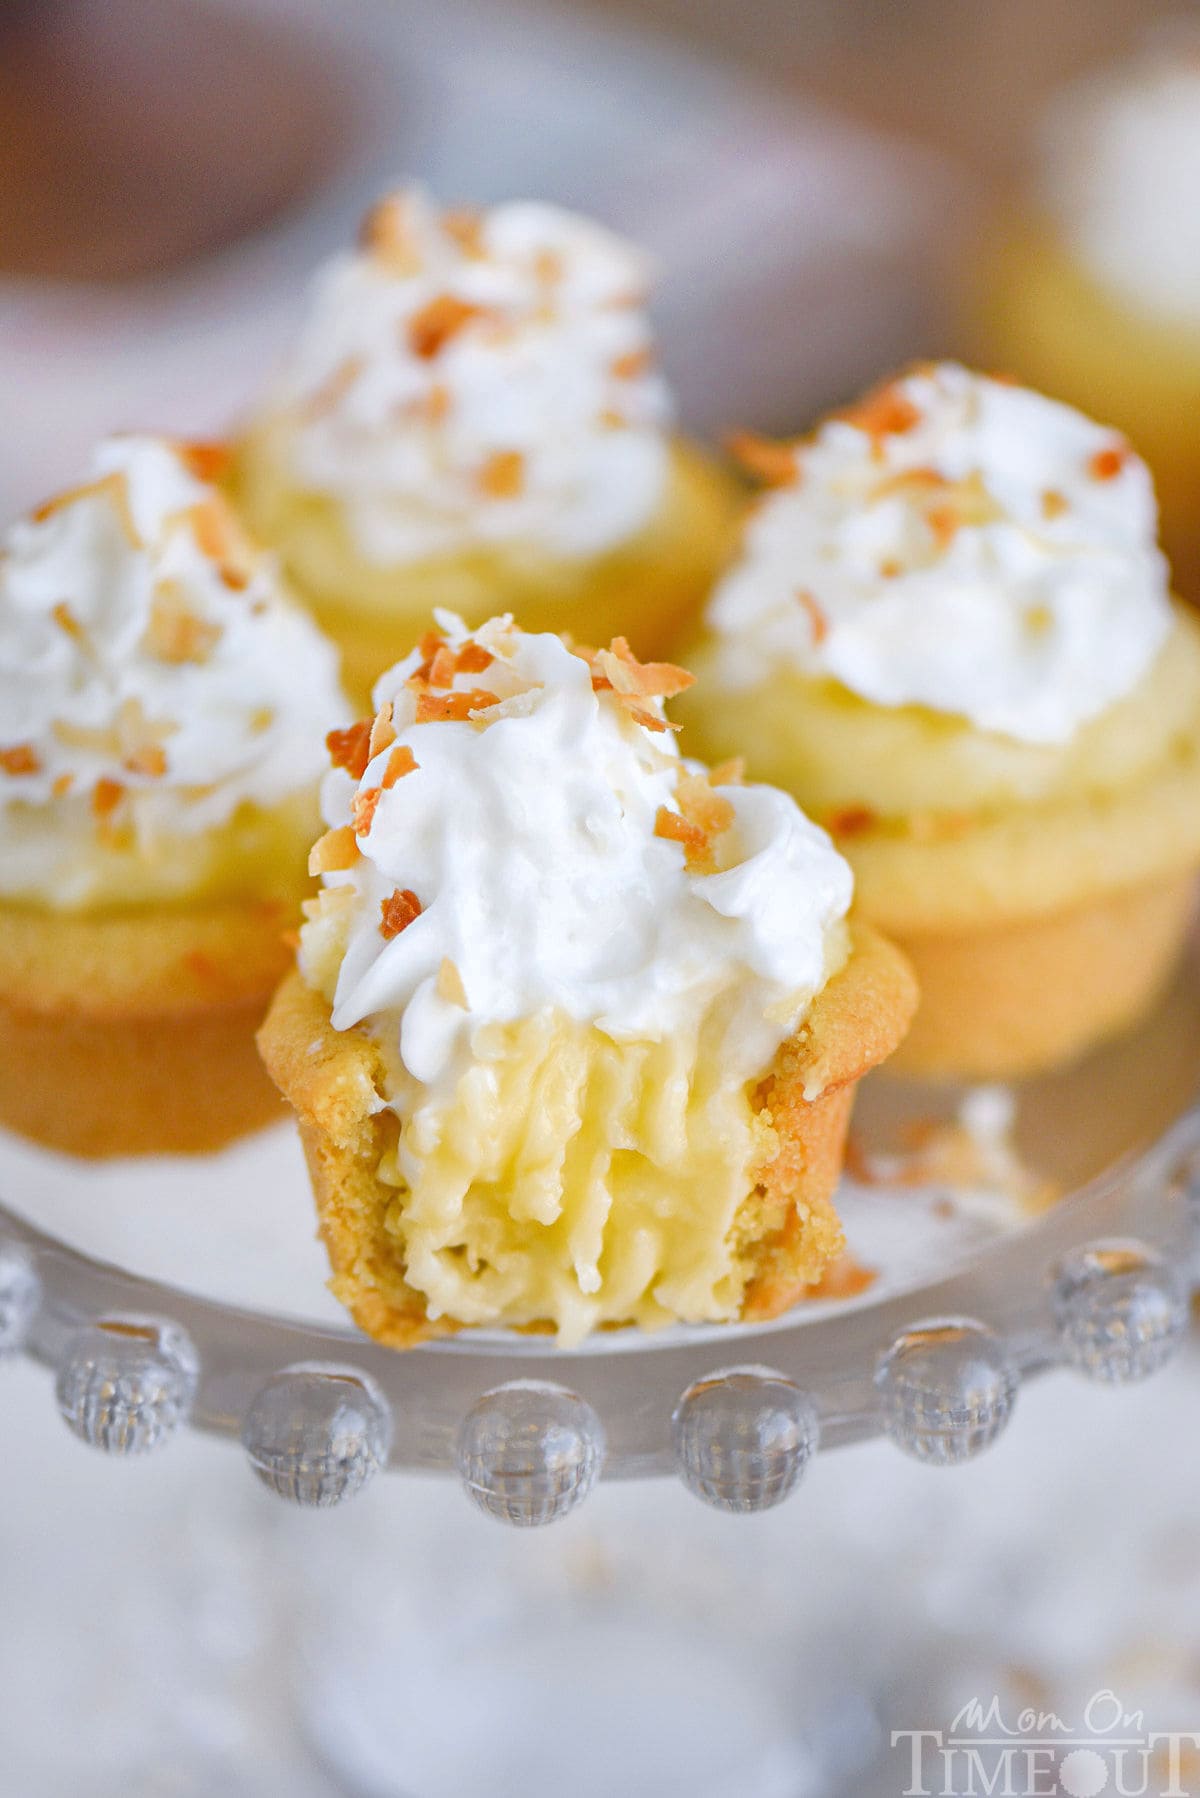 Four mini coconut cream pies on glass cake stand topped with whipped cream and toasted coconut. The front one has a bite taken out of it.